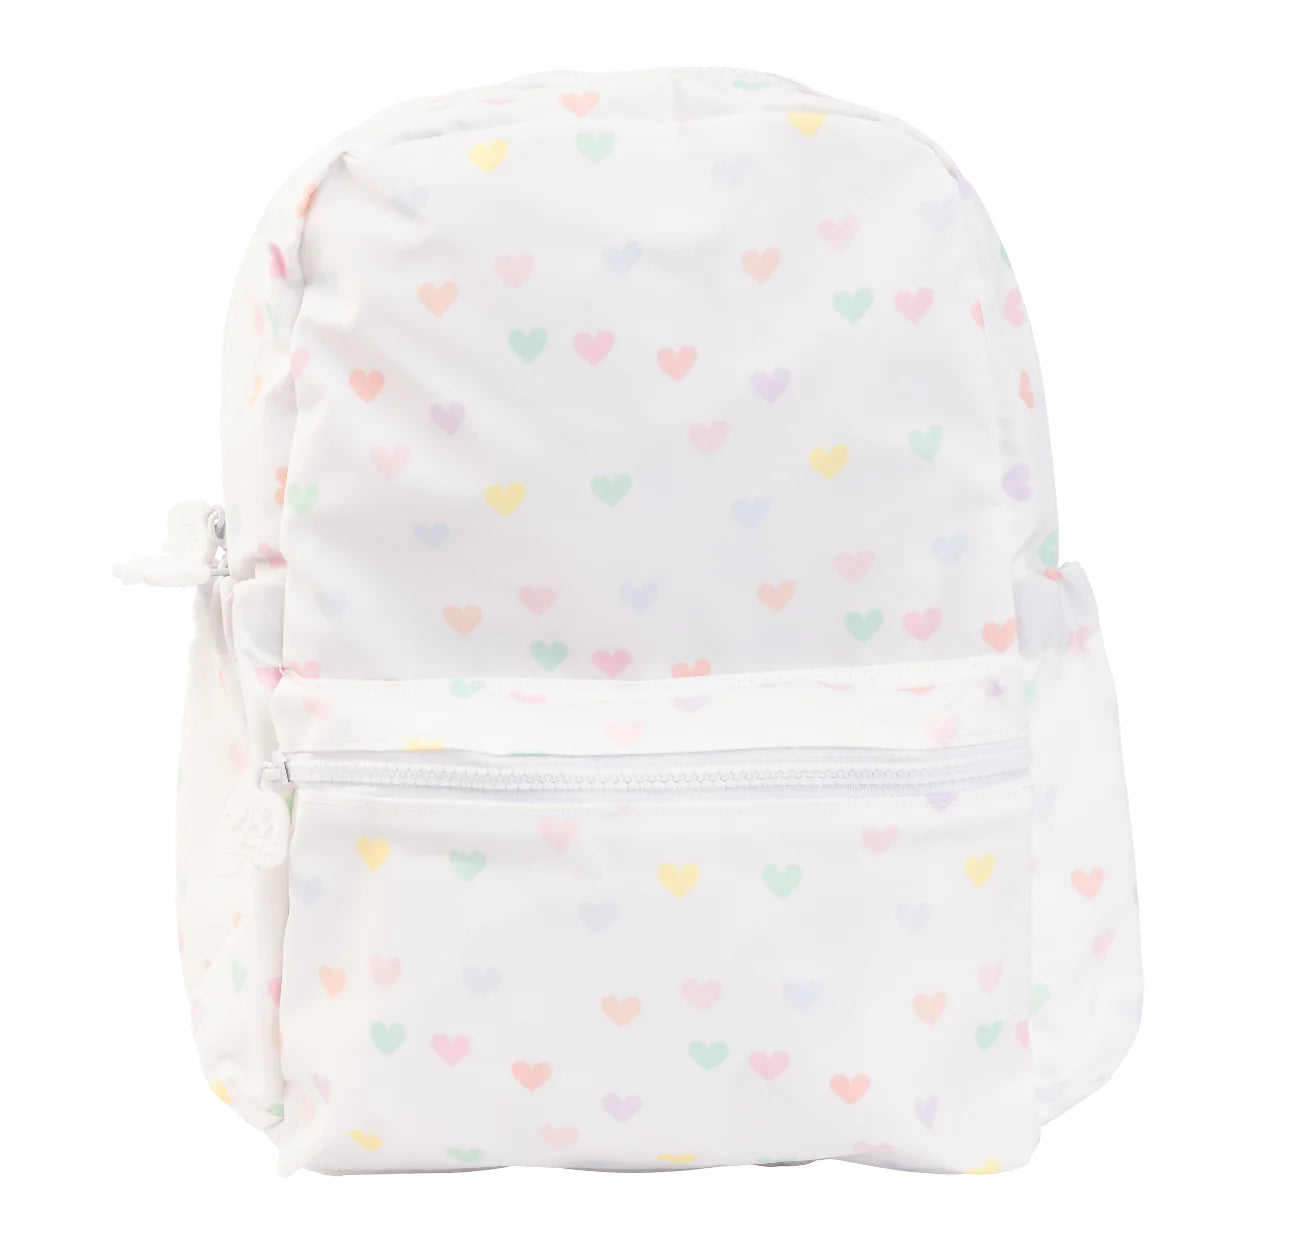 The Backpack - Small/Hearts